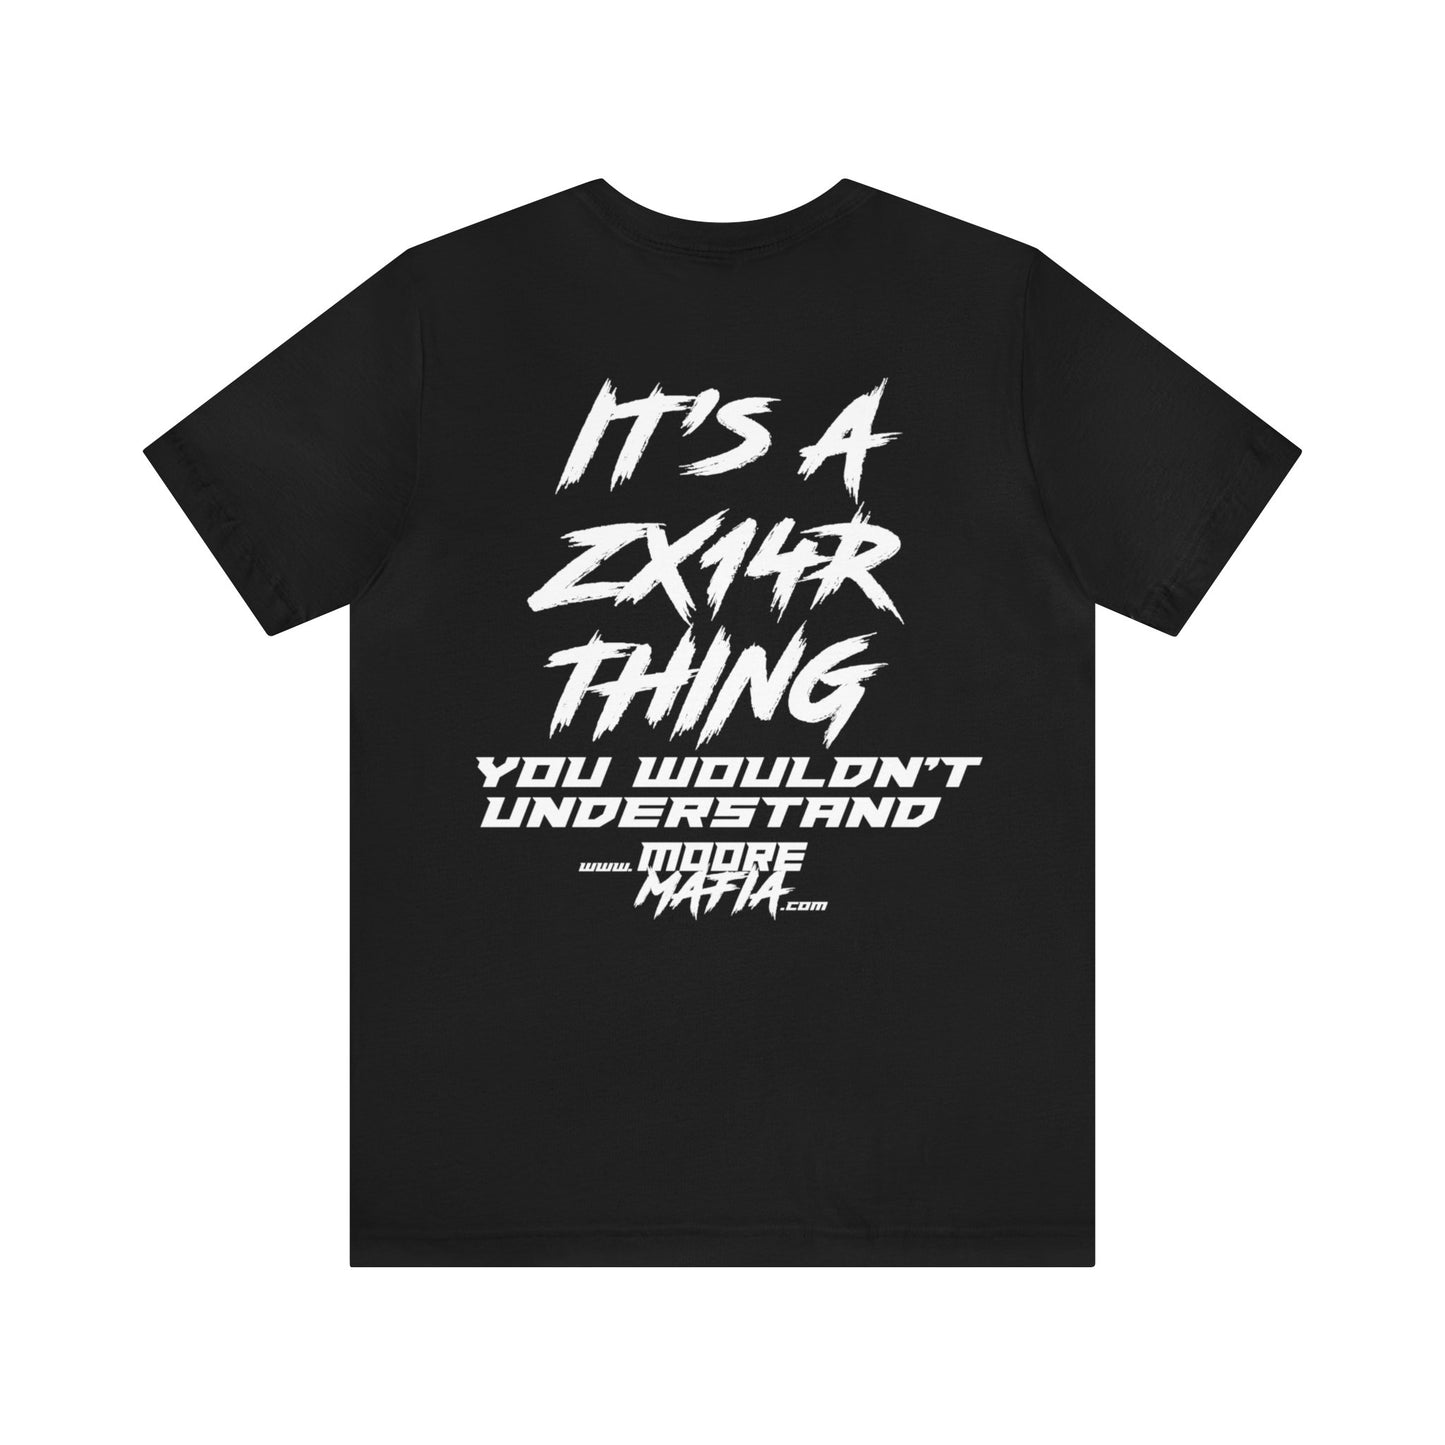 It's a ZX14R Thing White Unisex T-Shirt